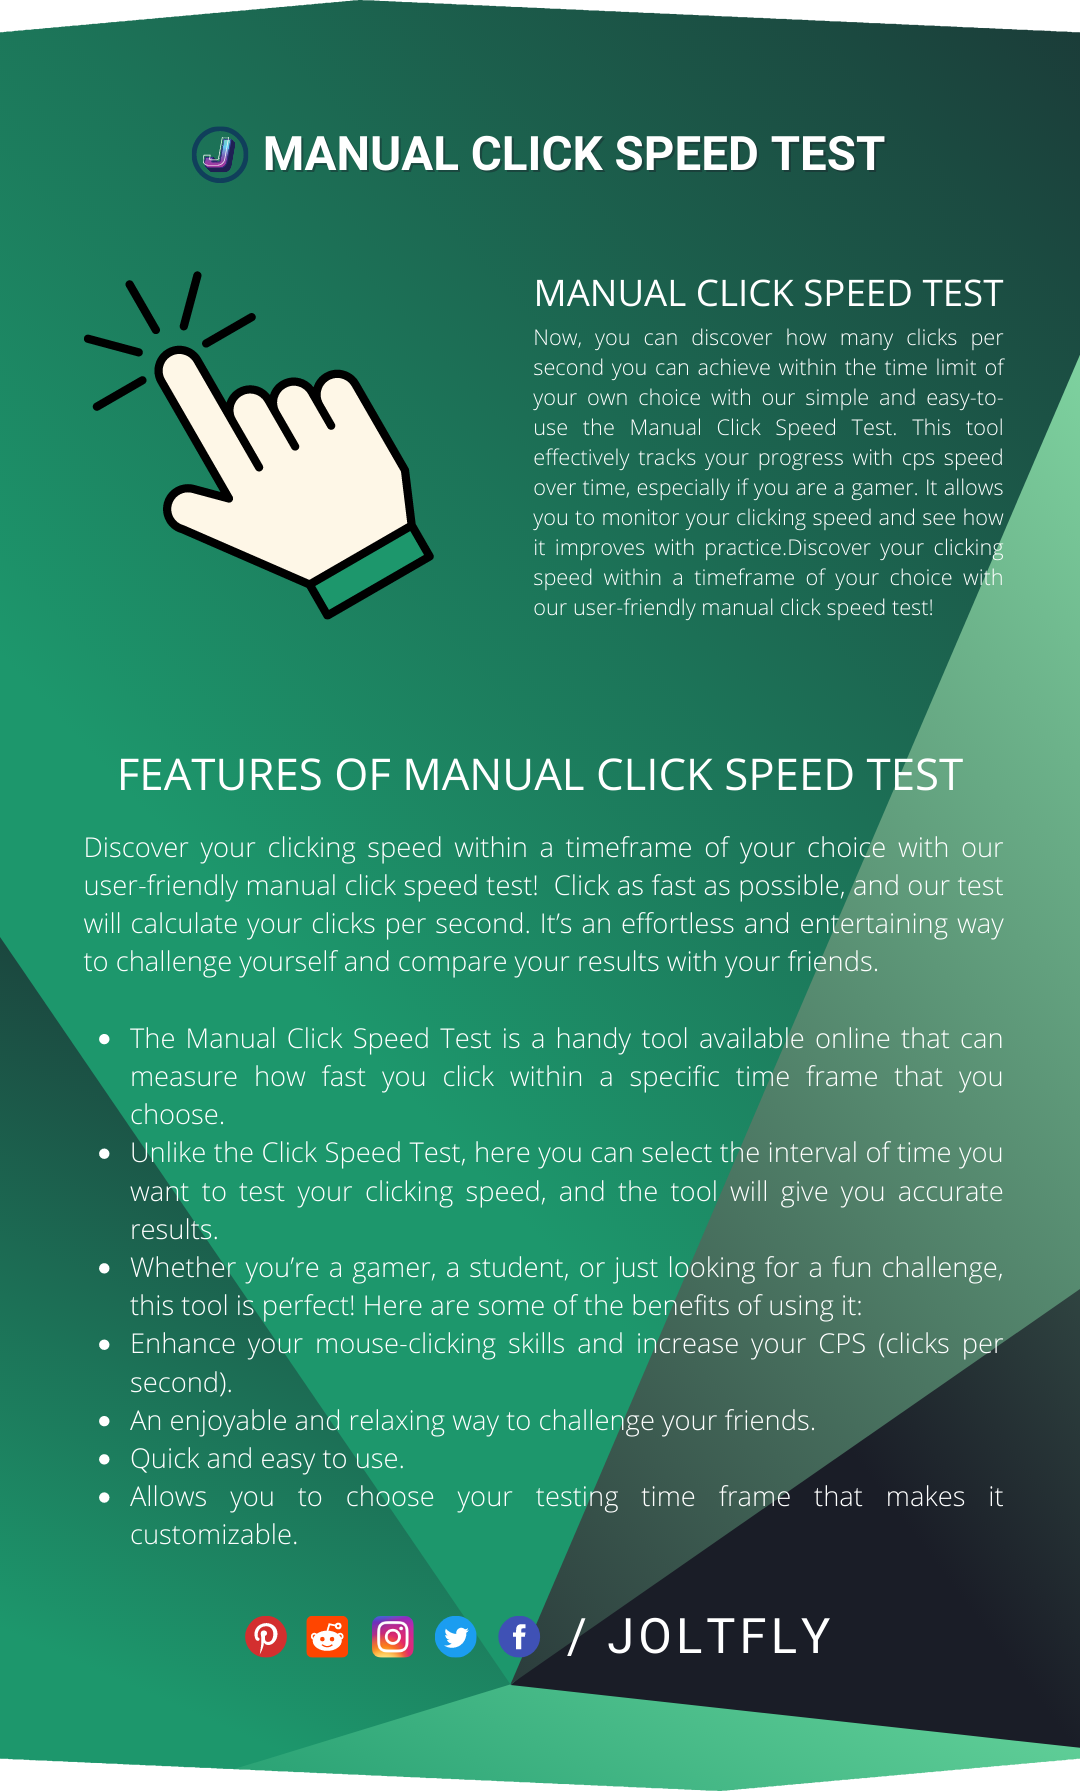 Manual Click Speed Test - Features